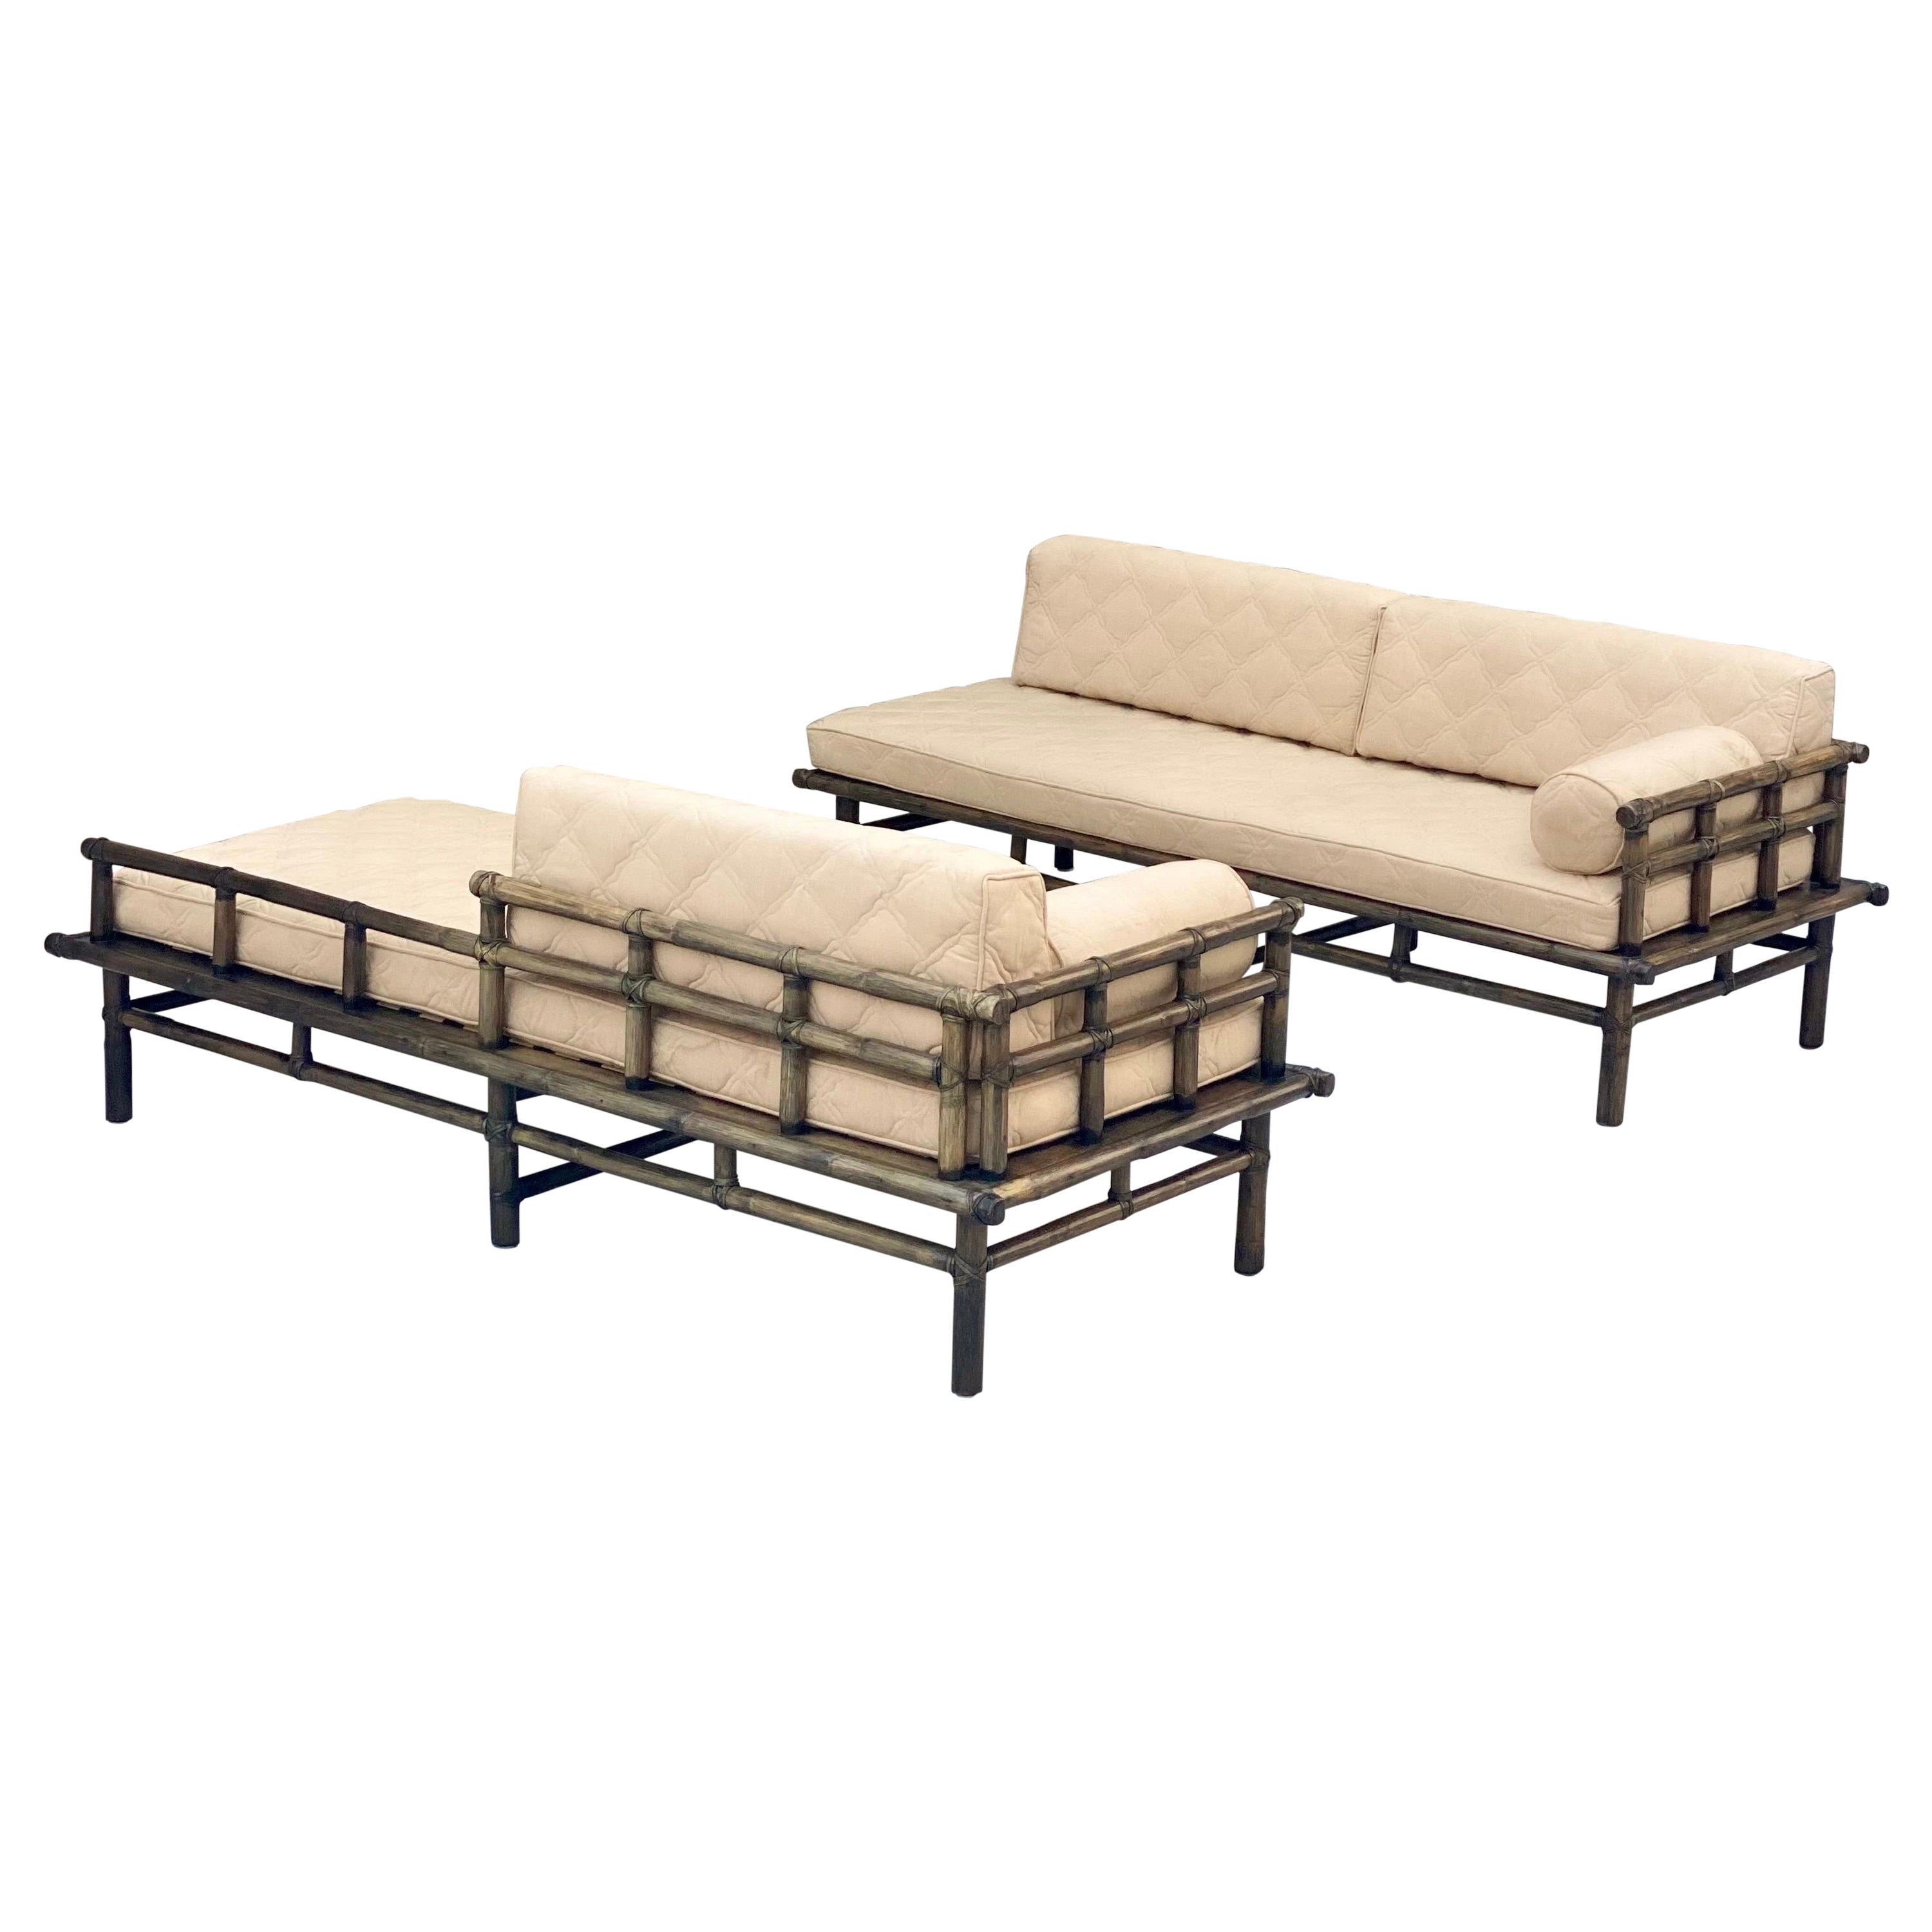 1980s McGuire Organic Modern Rattan Daybed or Sofas, a Pair